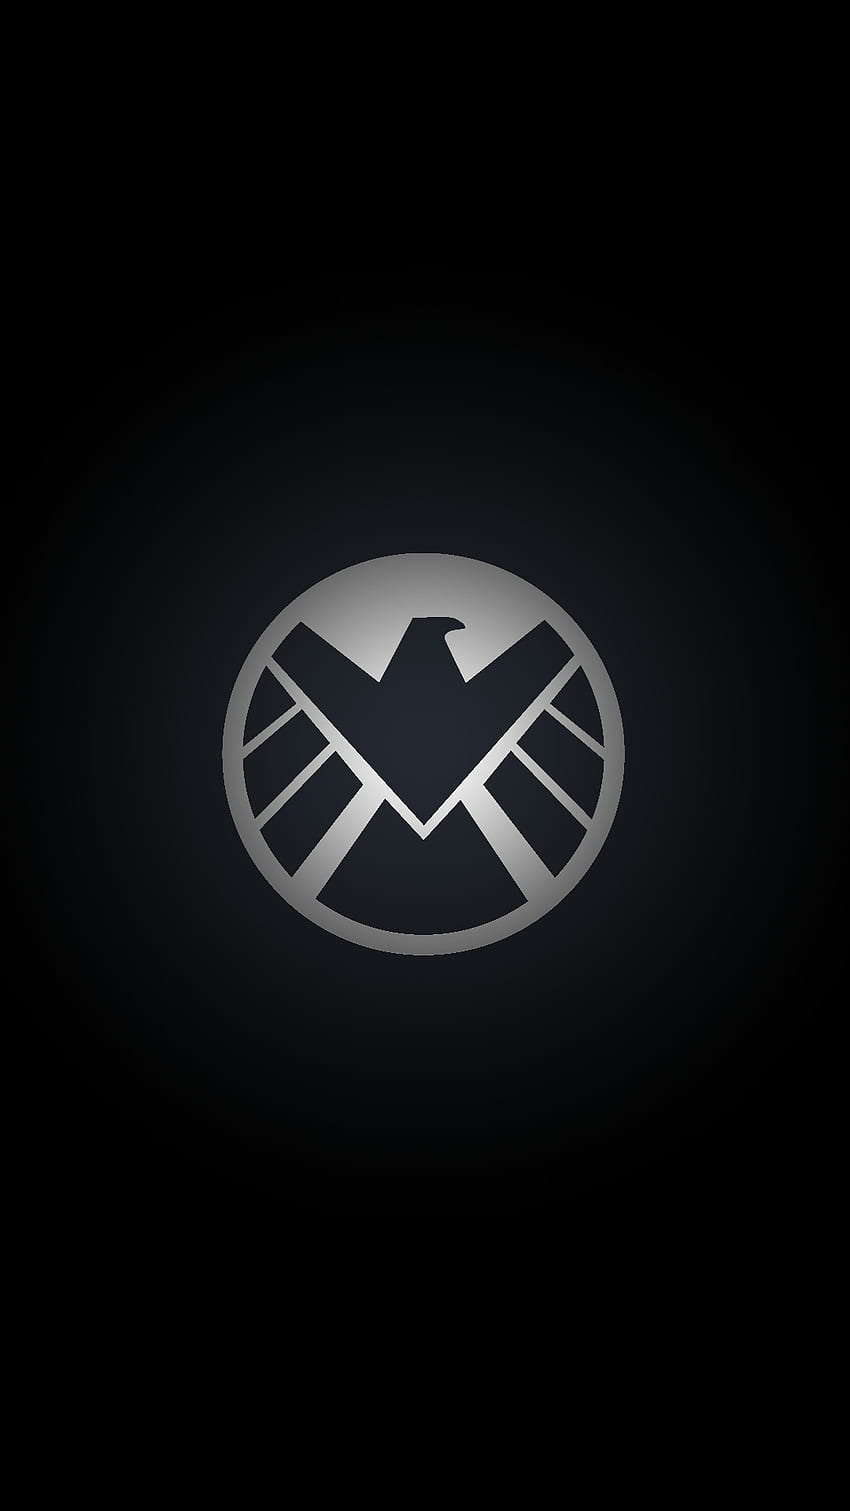 Agents of shield logo wallpaper Top HQ Wallpapers